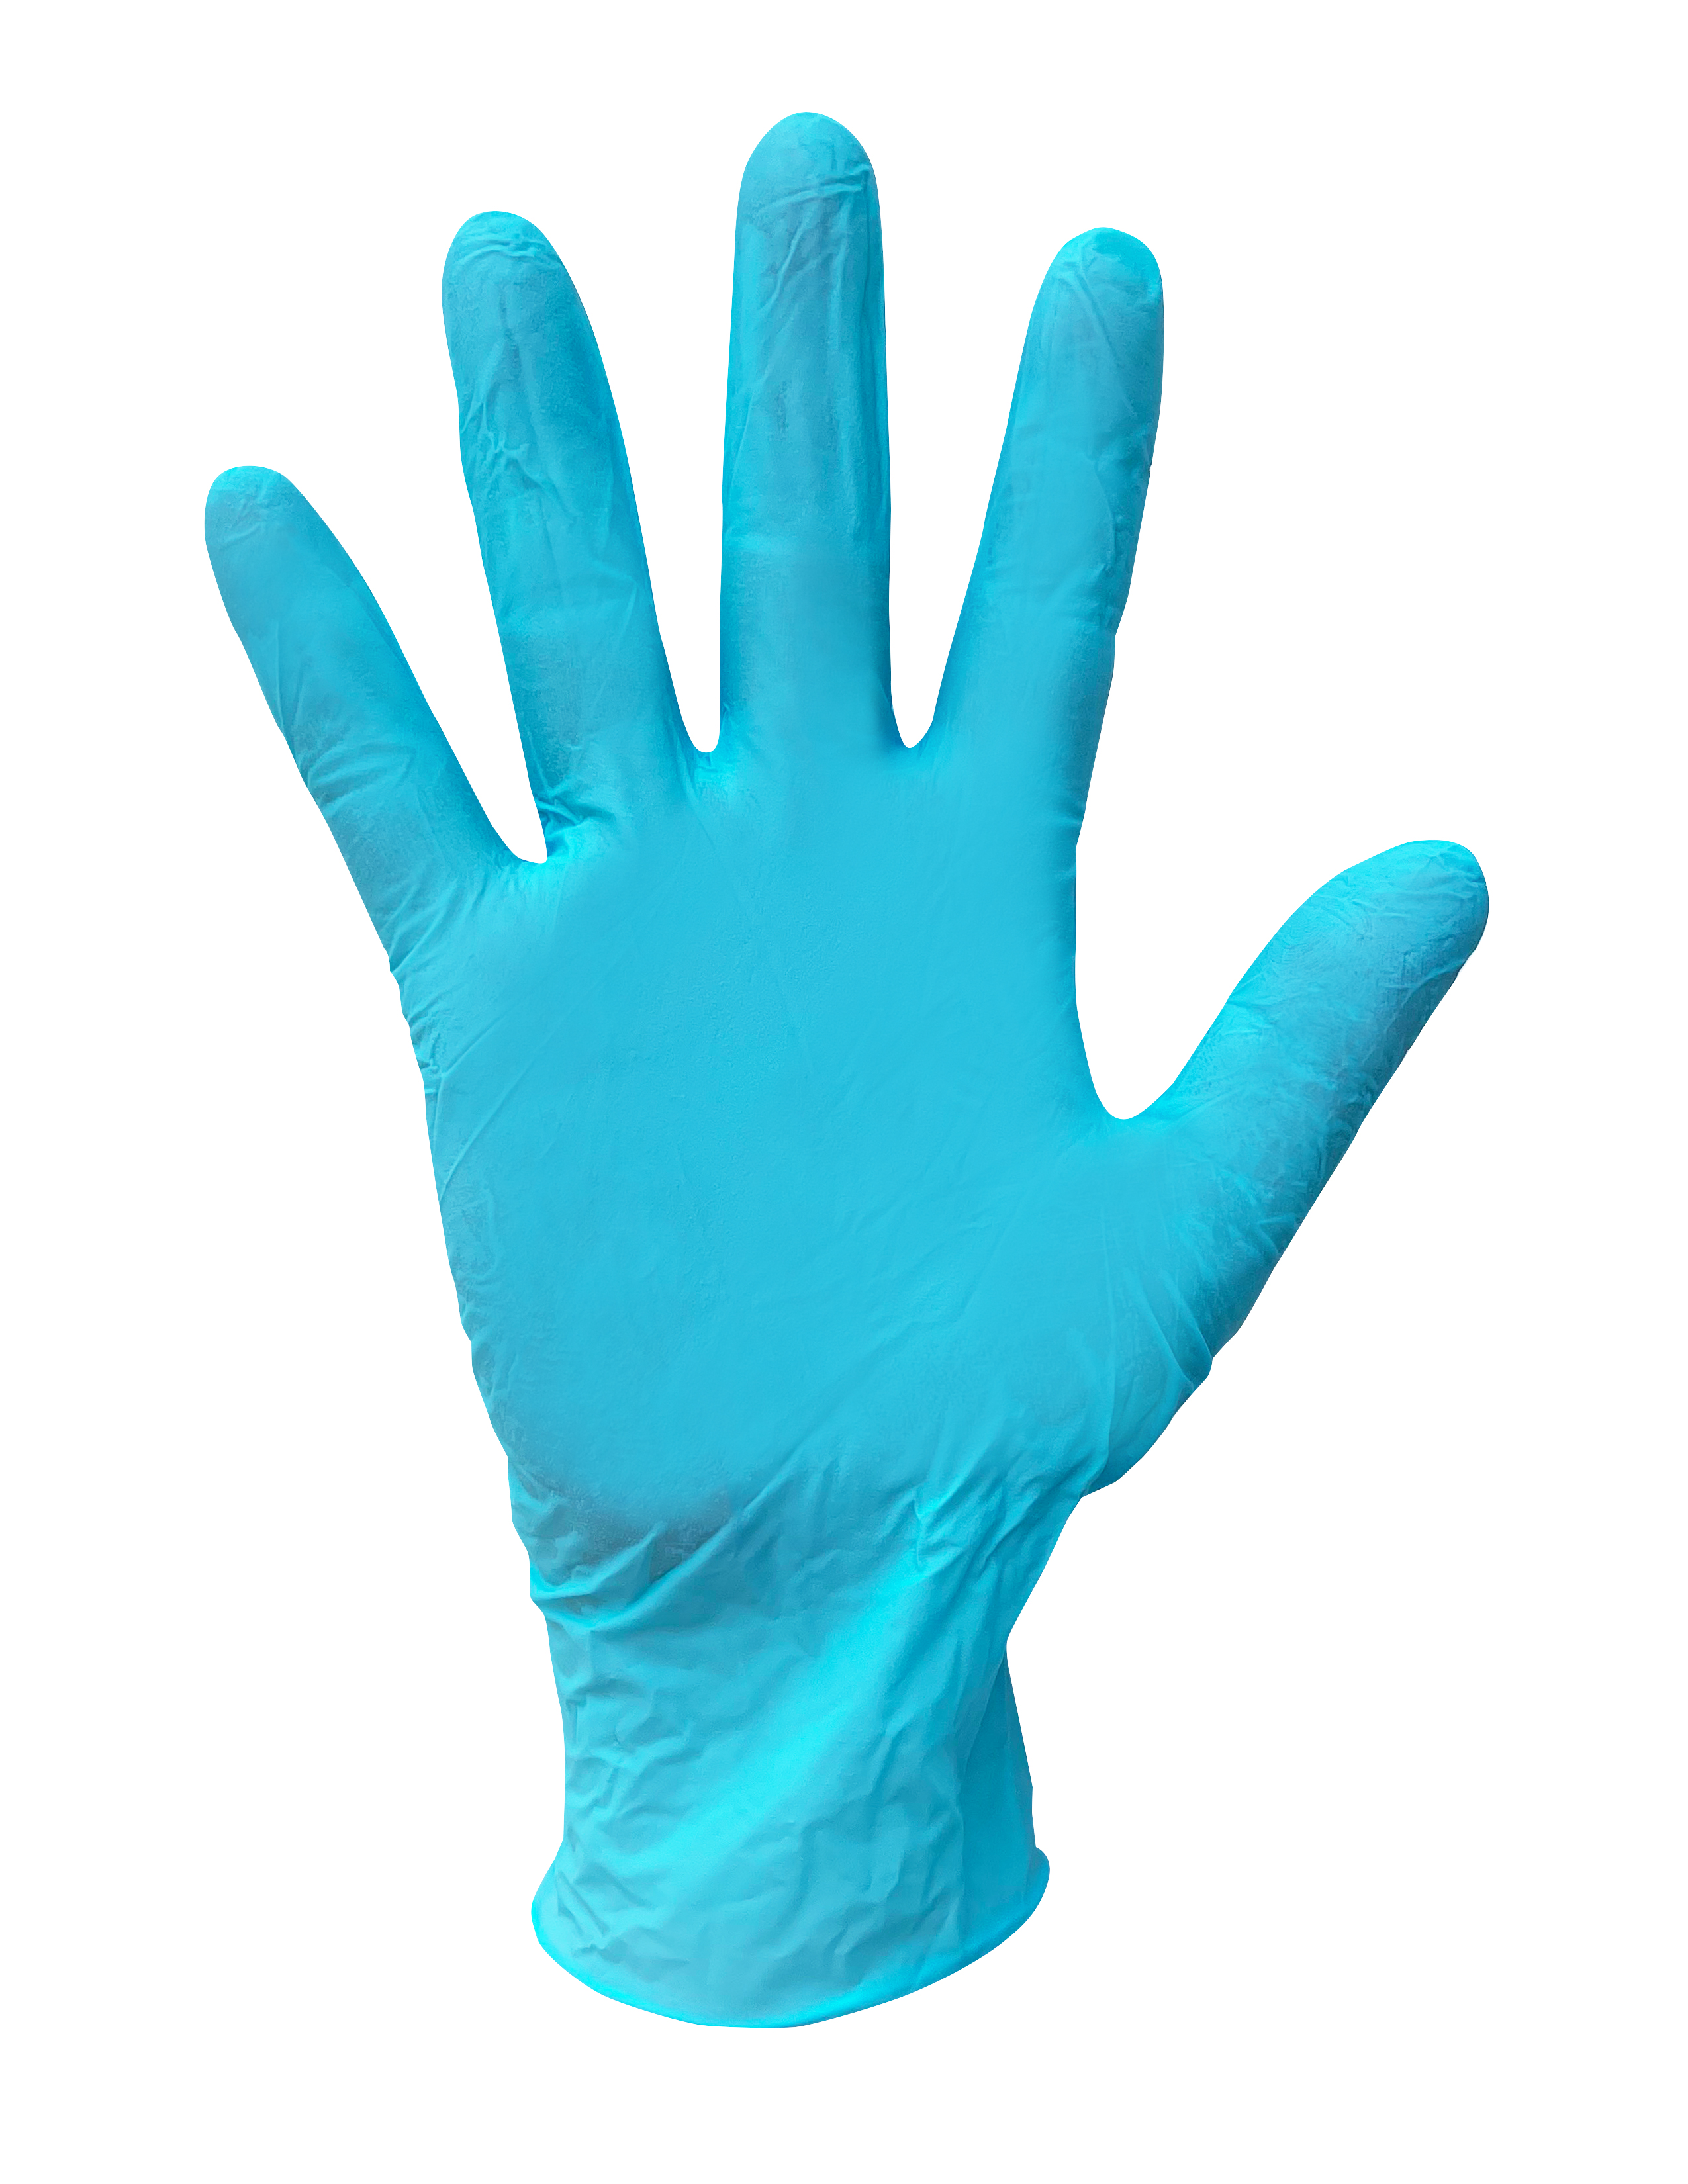 AWP Pro Paint 49810-14 Disposable Gloves, Nitrile, Blue, One Size, 50 Count - image 4 of 6